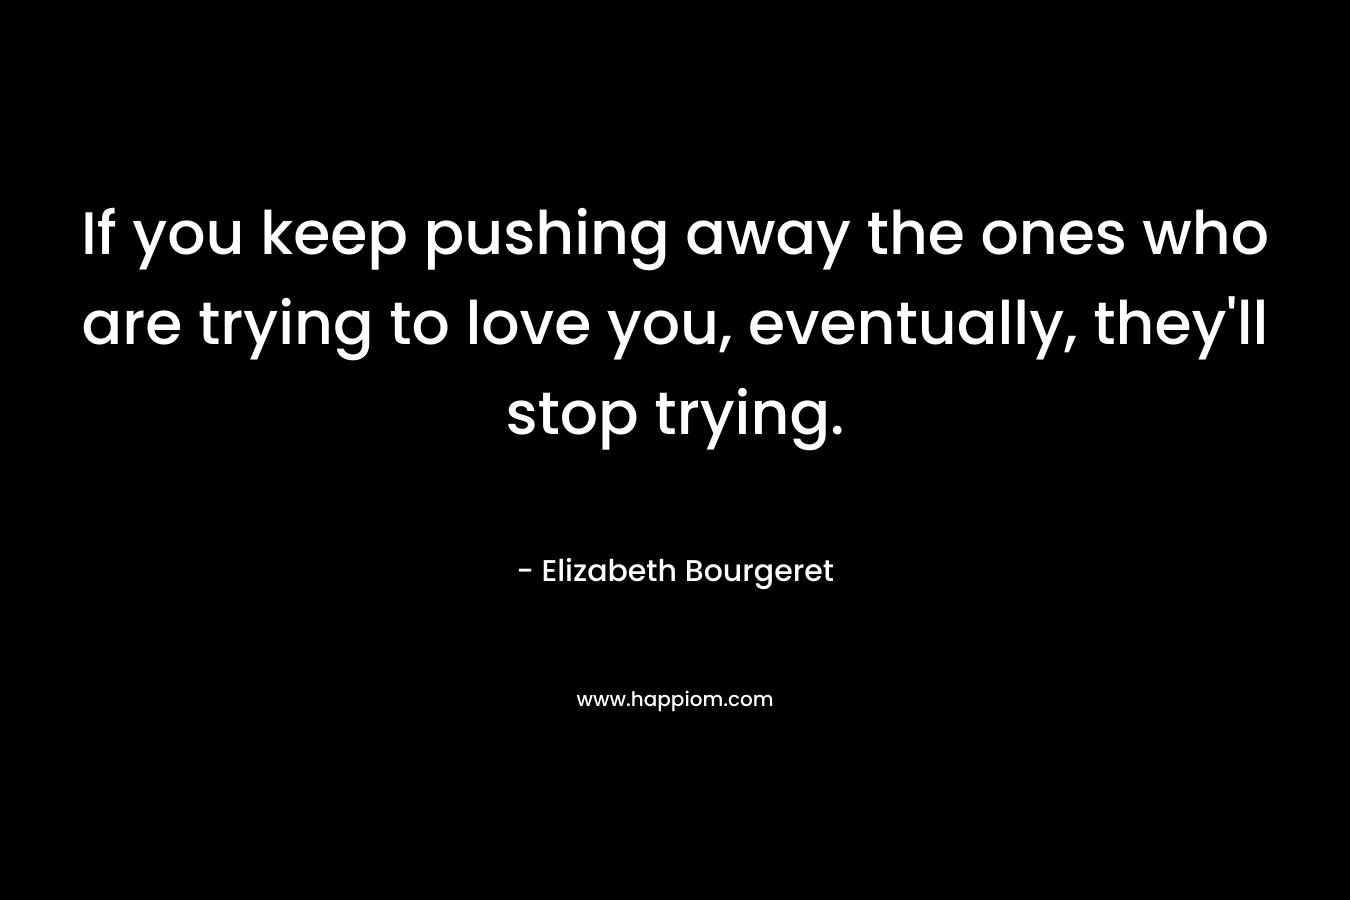 If you keep pushing away the ones who are trying to love you, eventually, they'll stop trying.